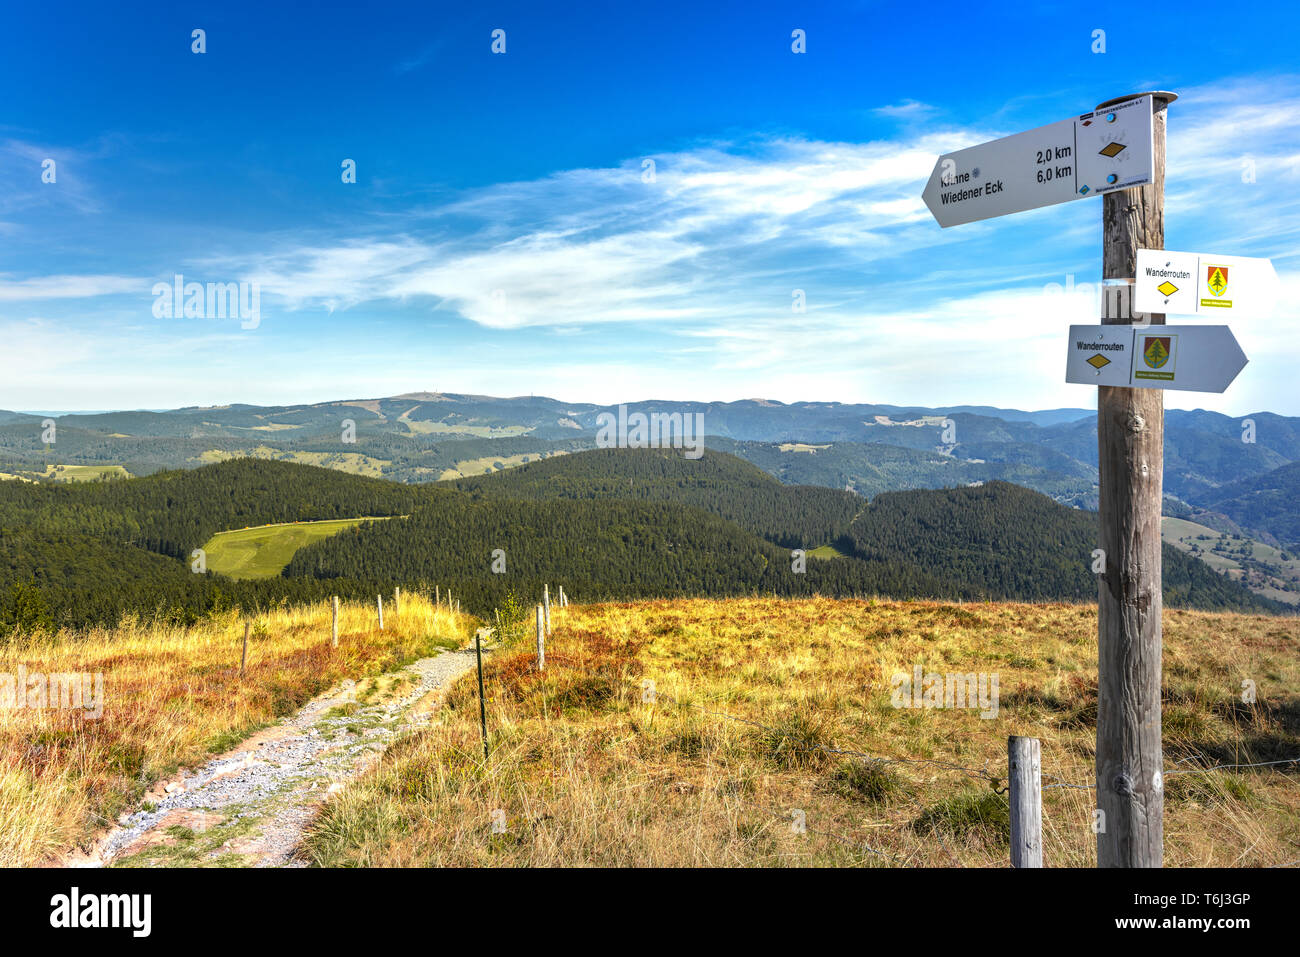 panorama on the hilltop of the mountain Belchen, view to the mountain Feldberg, High Black Forest, Germany, hiking plates in the foreground Stock Photo